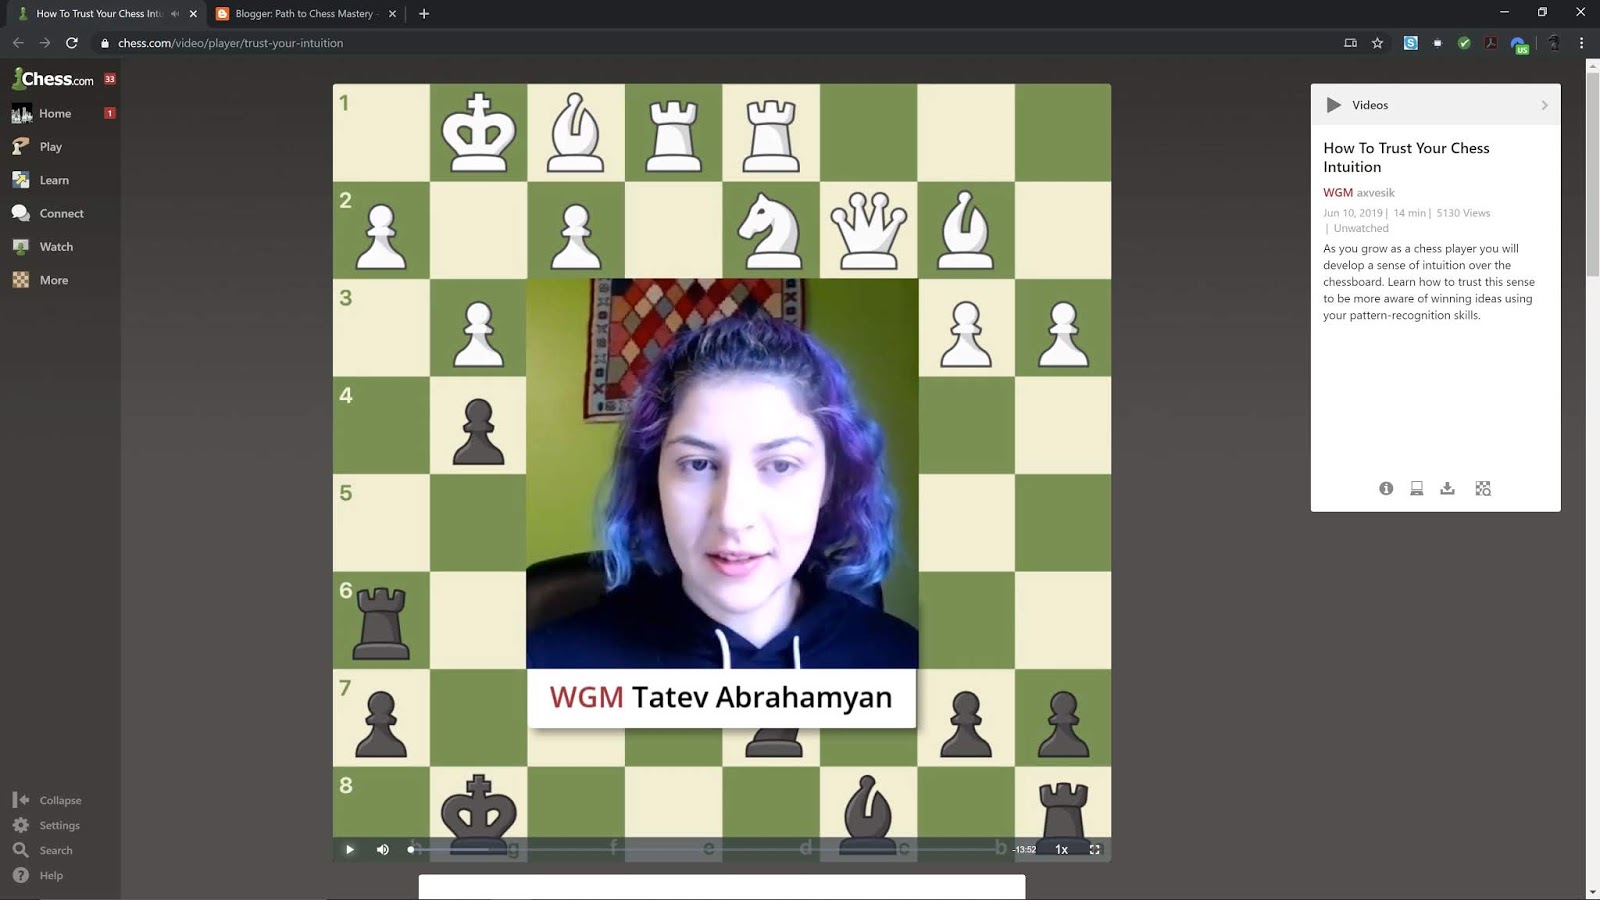 Path To Chess Mastery Video Completed How To Trust Your Chess